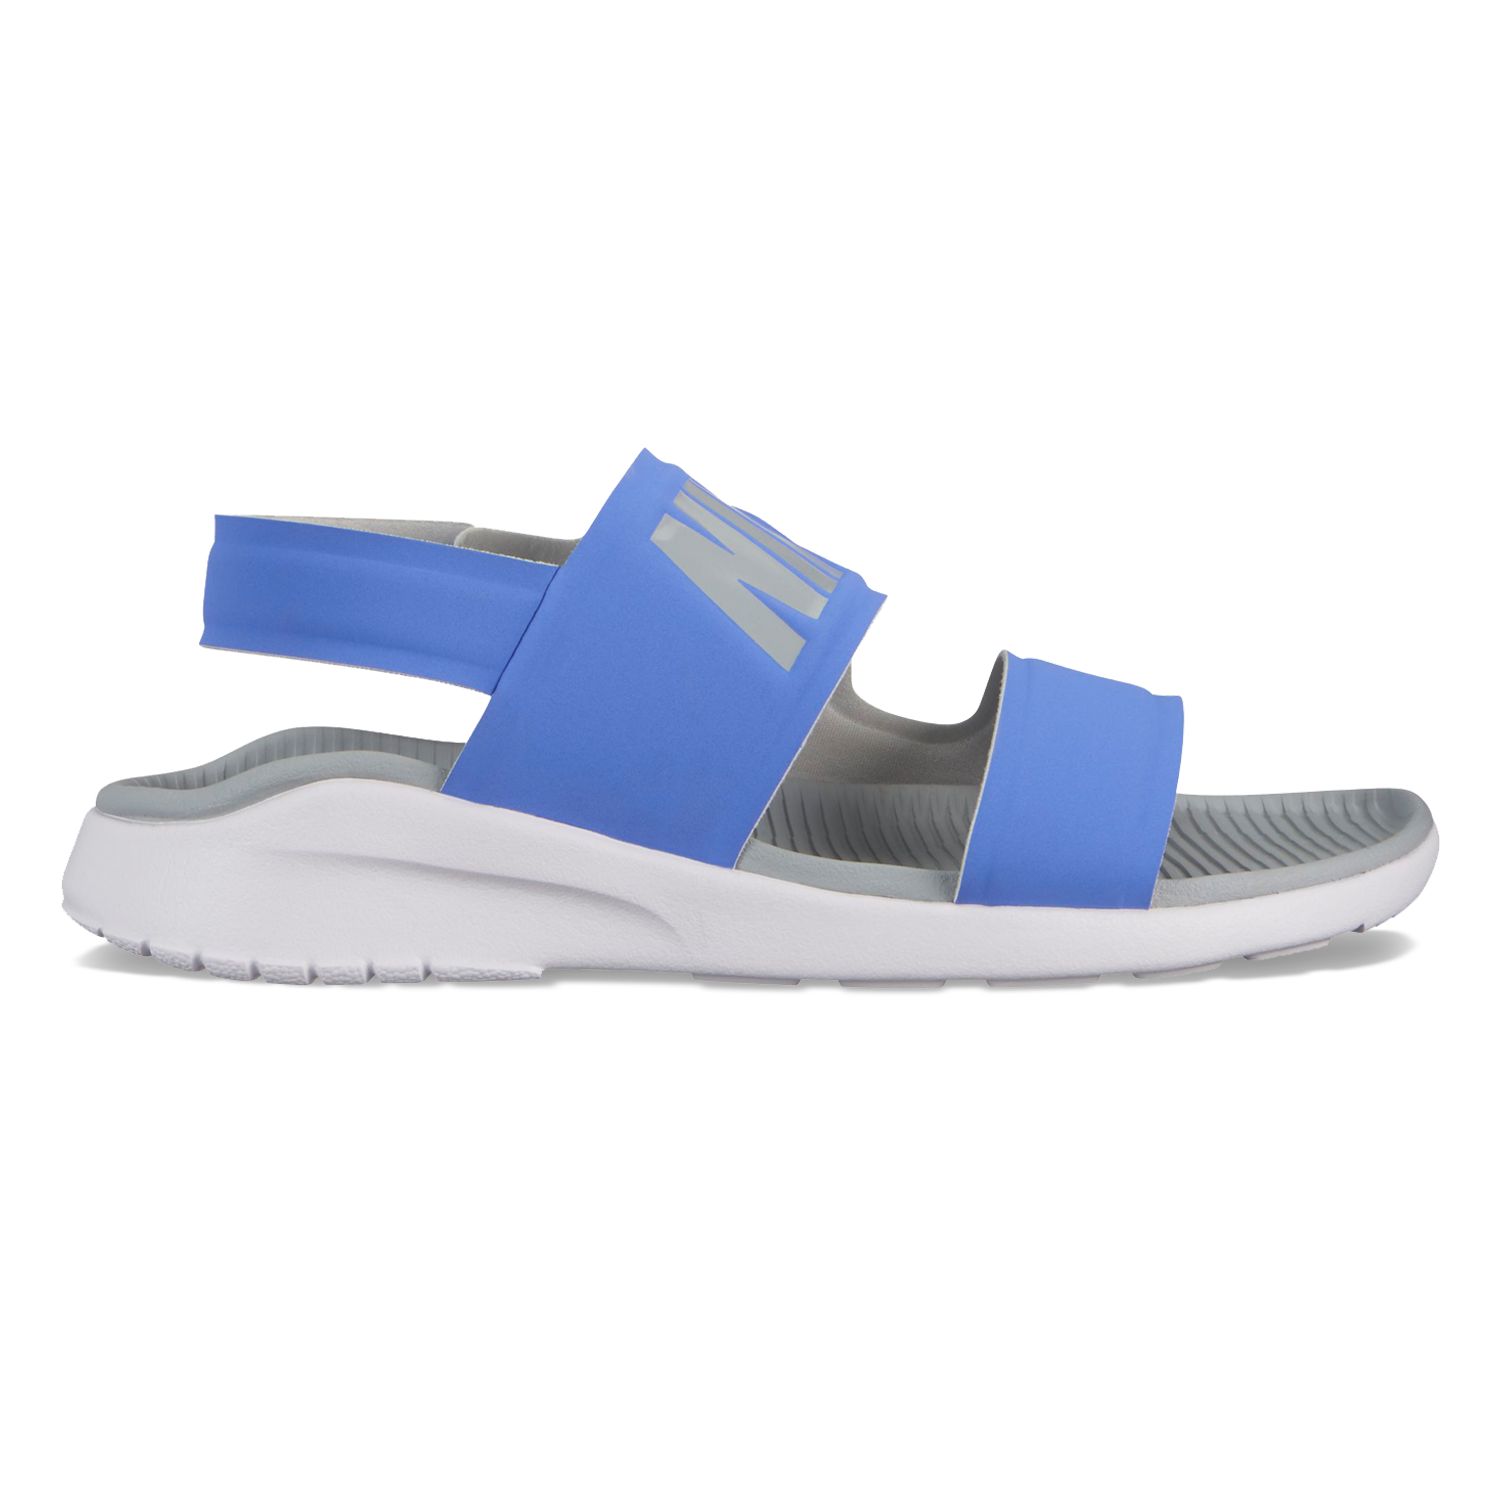 nike slides with straps on the back